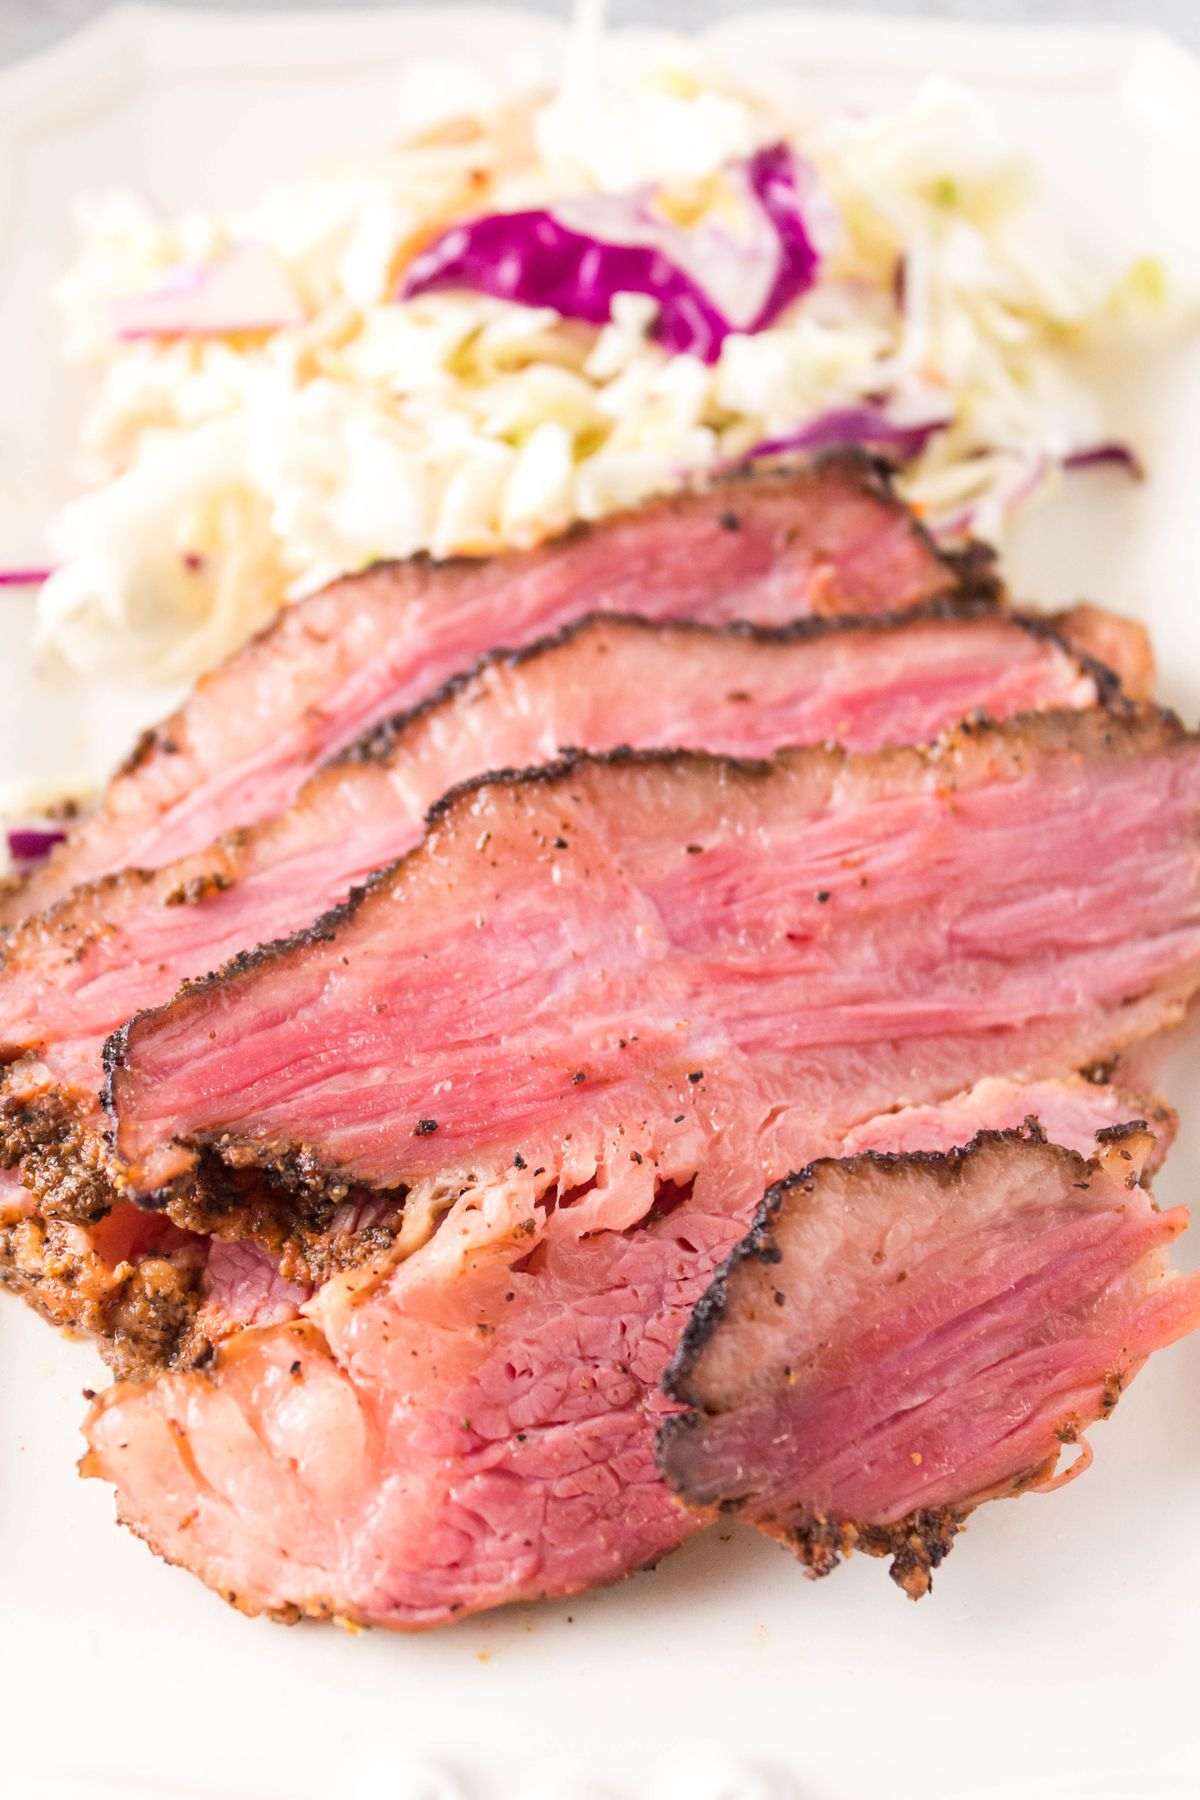 Smoked Corned Beef Brisket | Easy Wholesome